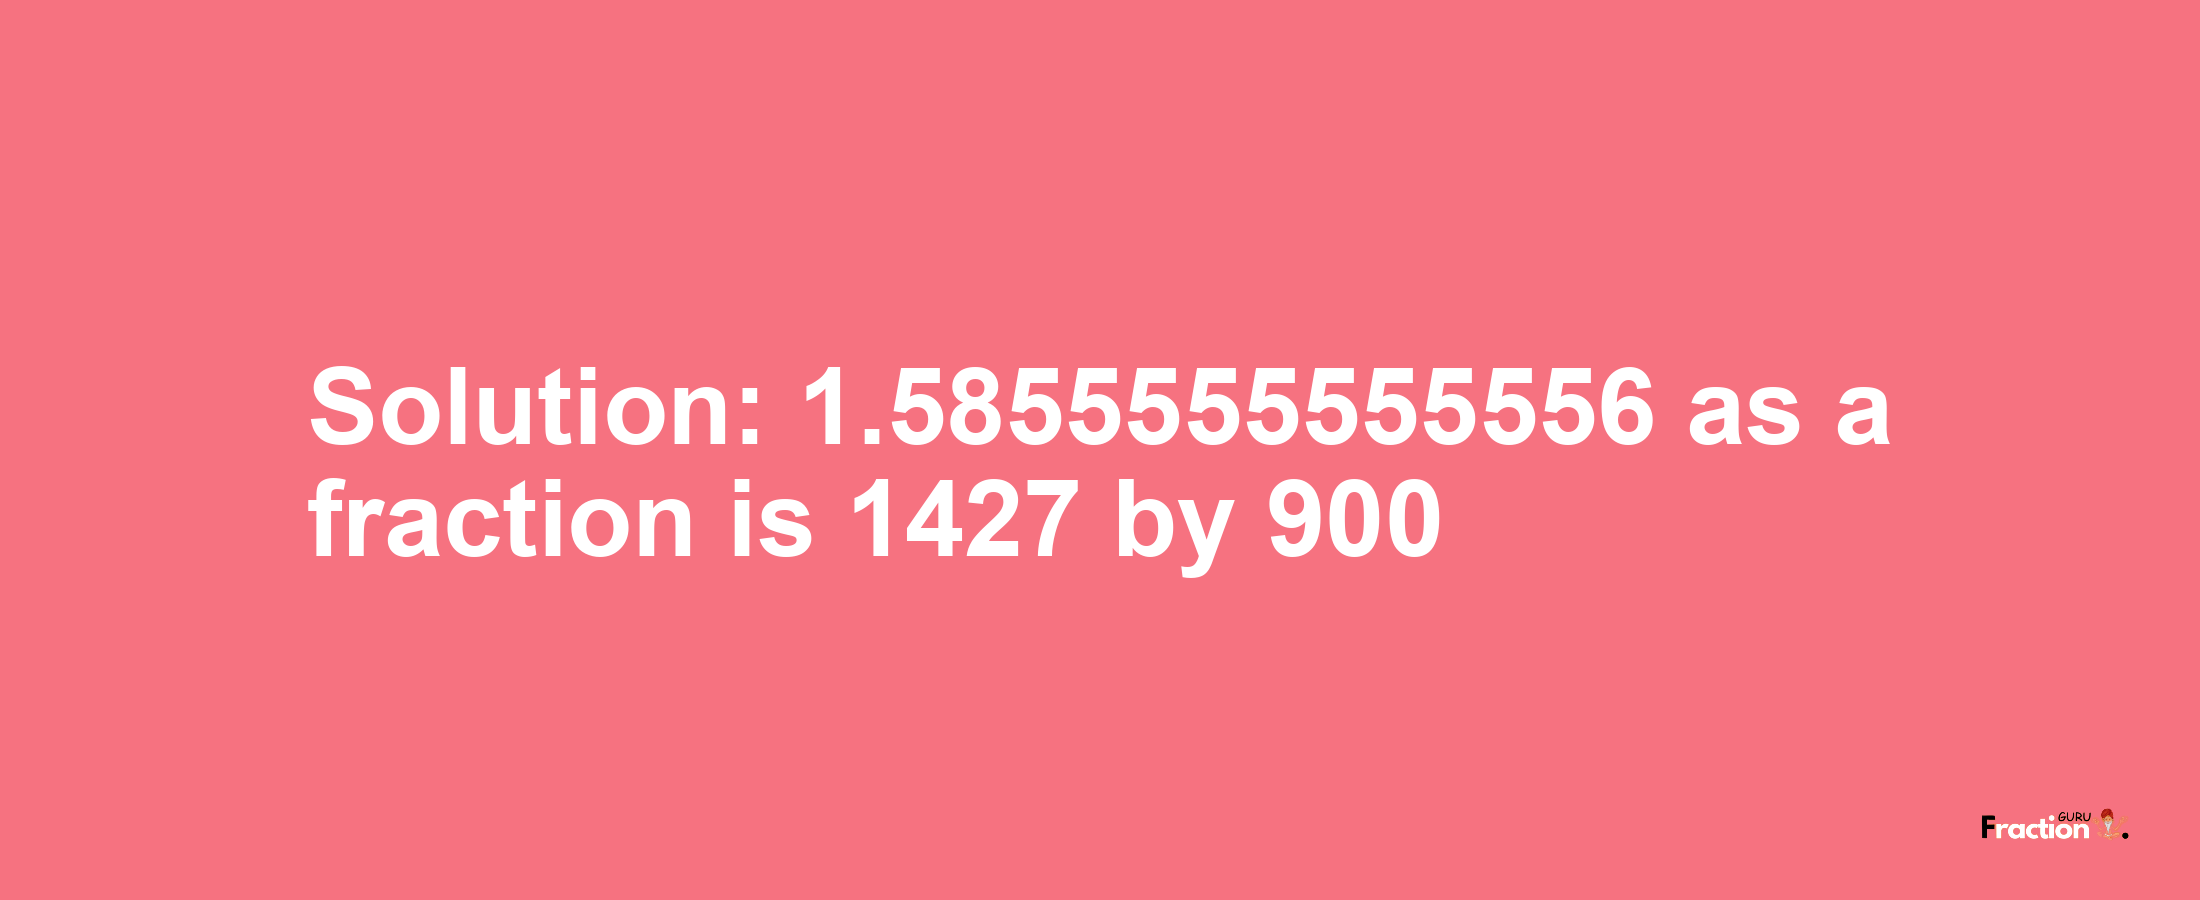 Solution:1.5855555555556 as a fraction is 1427/900